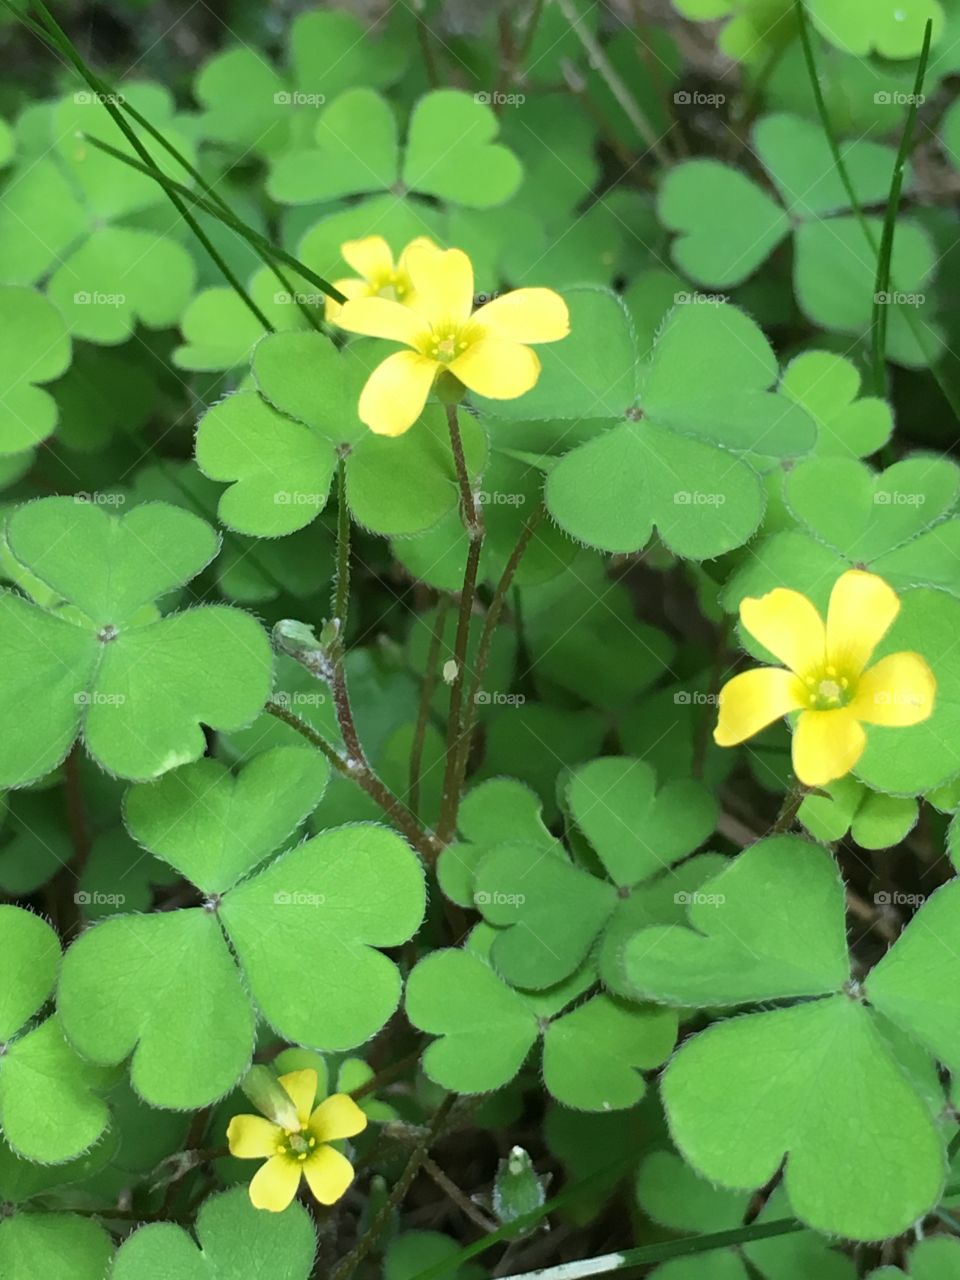 Sorrel plant with shamrock leaves and yellow flowers in close up in the garden 